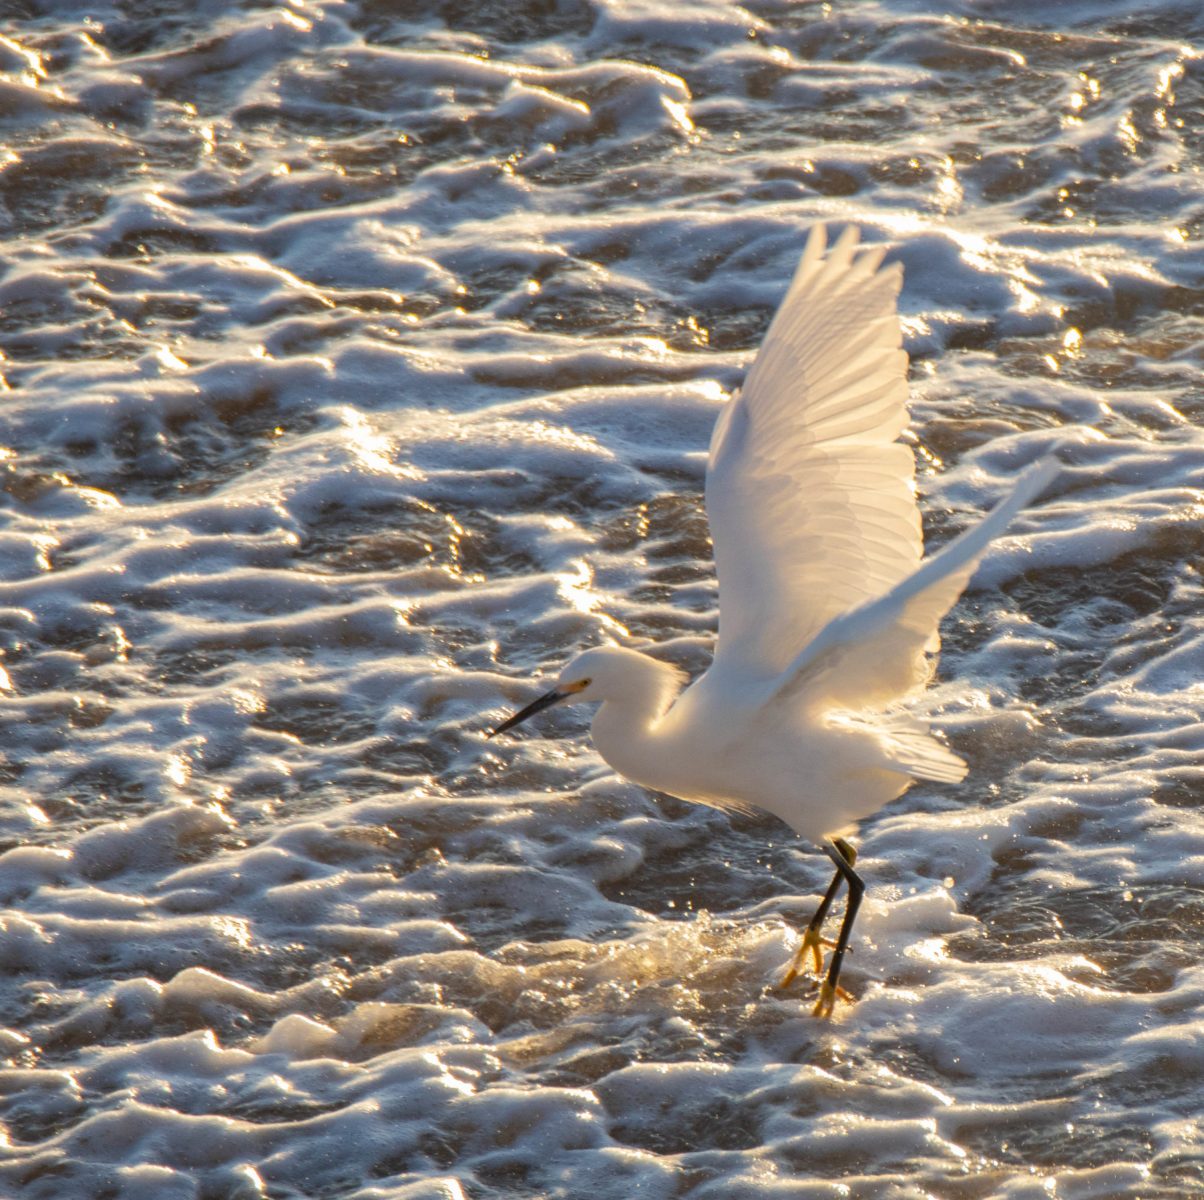 Snowy Egret taking off from the waves.